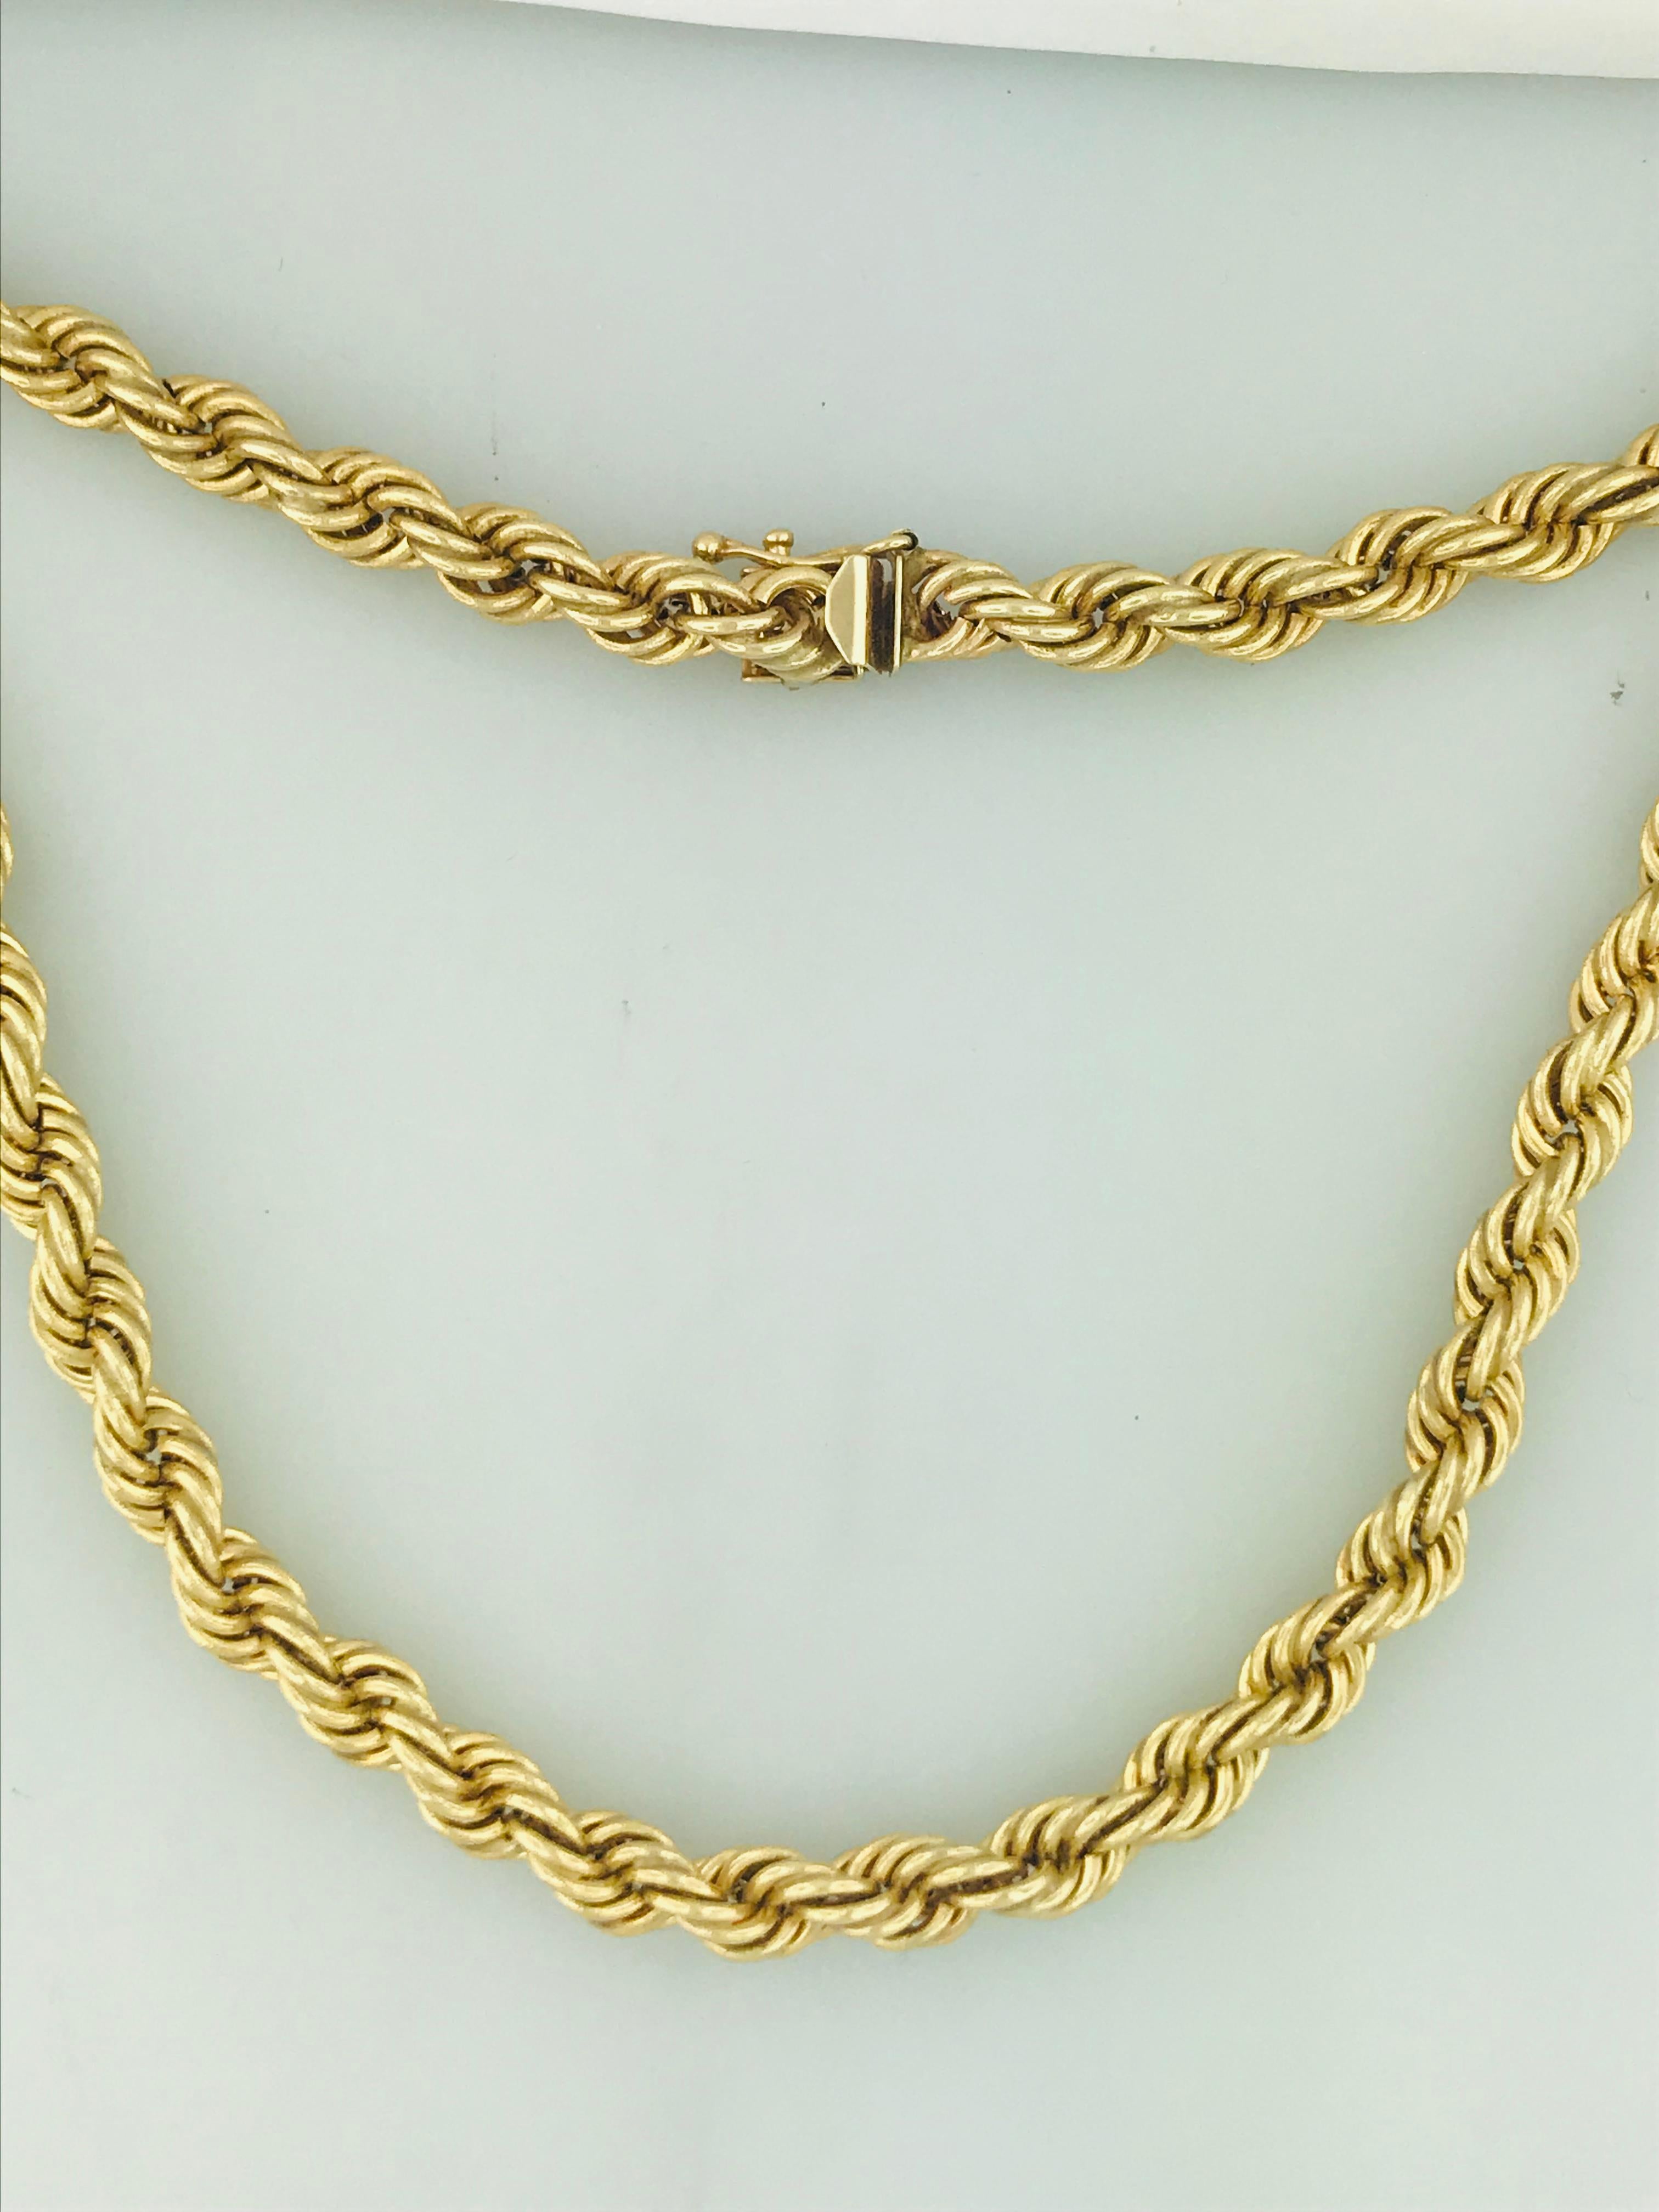 The 14 karat yellow gold rope chain is a 28 inch necklace with a 7mm wide rope chain design. The 14 karat yellow gold is bold and rich and looks great on every skin tone, paired with any attire. The chain would make a classic statement necklace, a